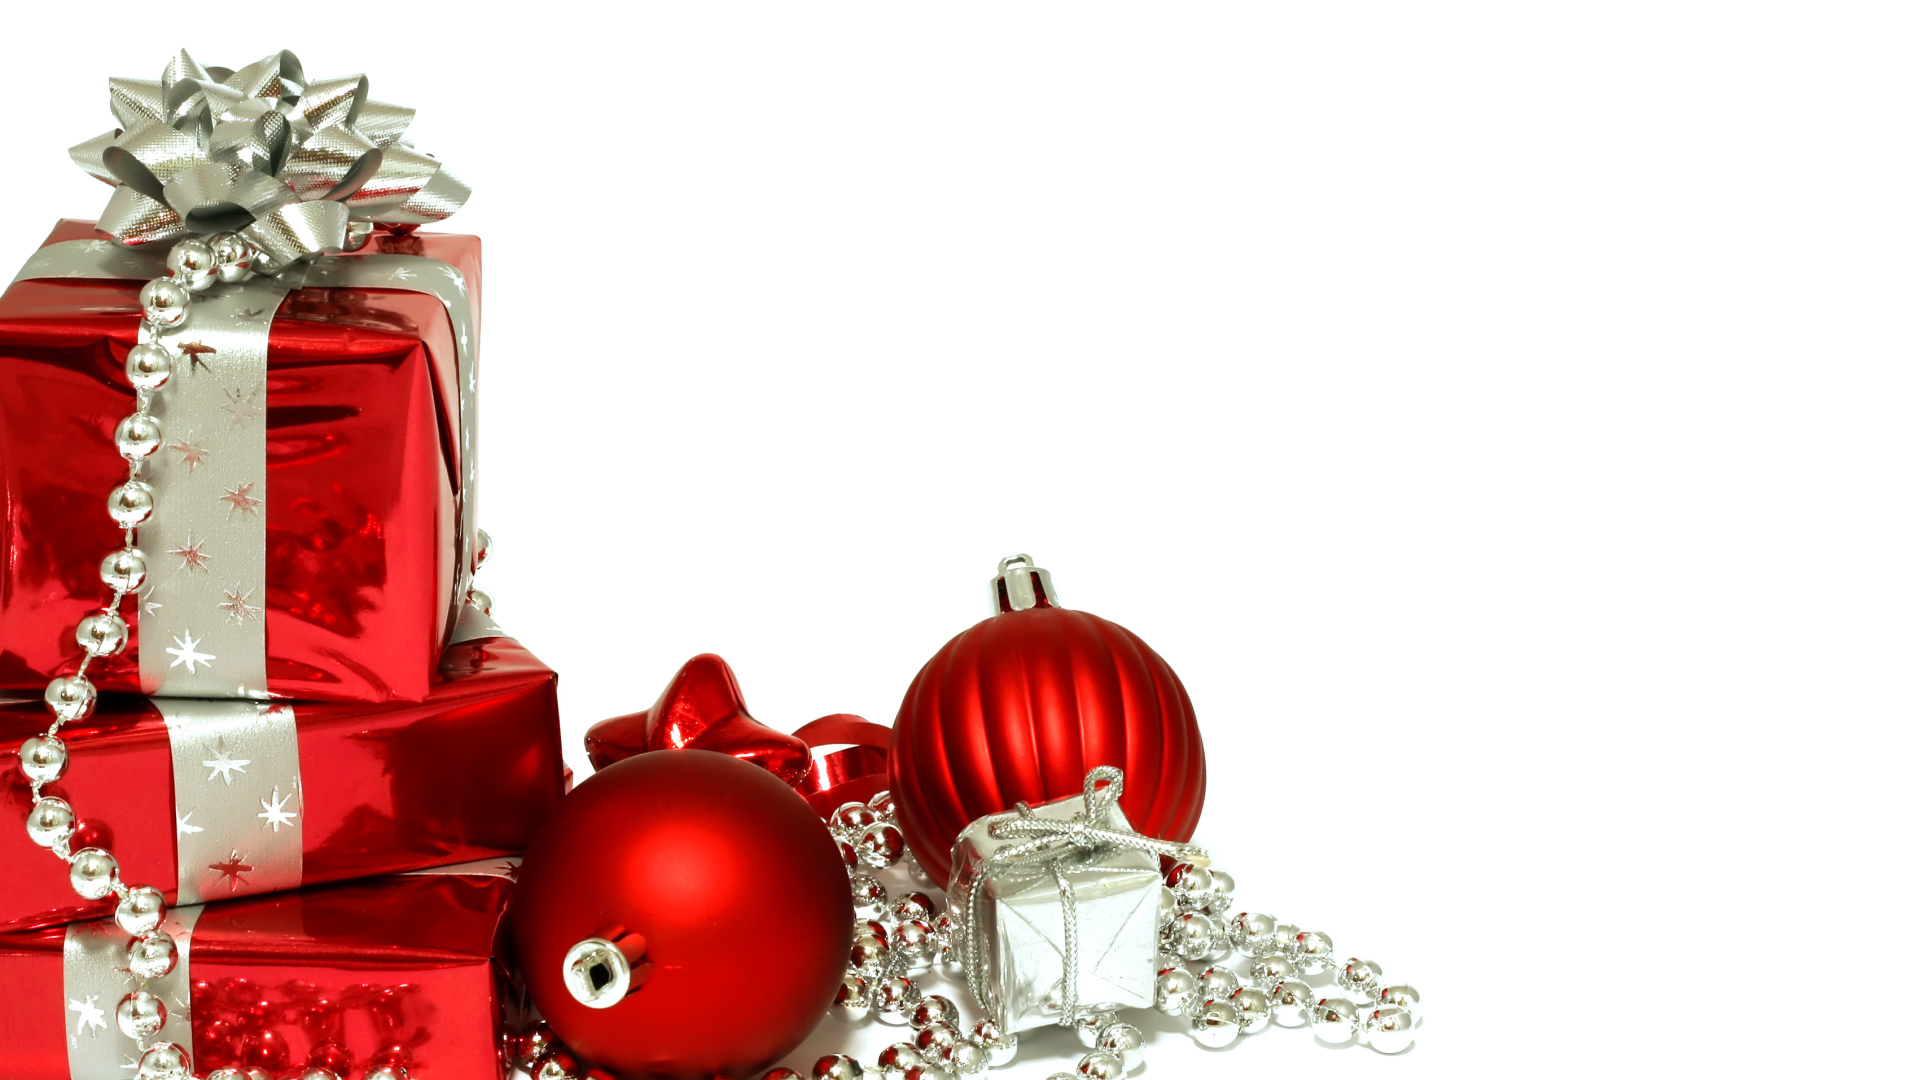 Red Christmas decorations and gifts on Christmas, white background